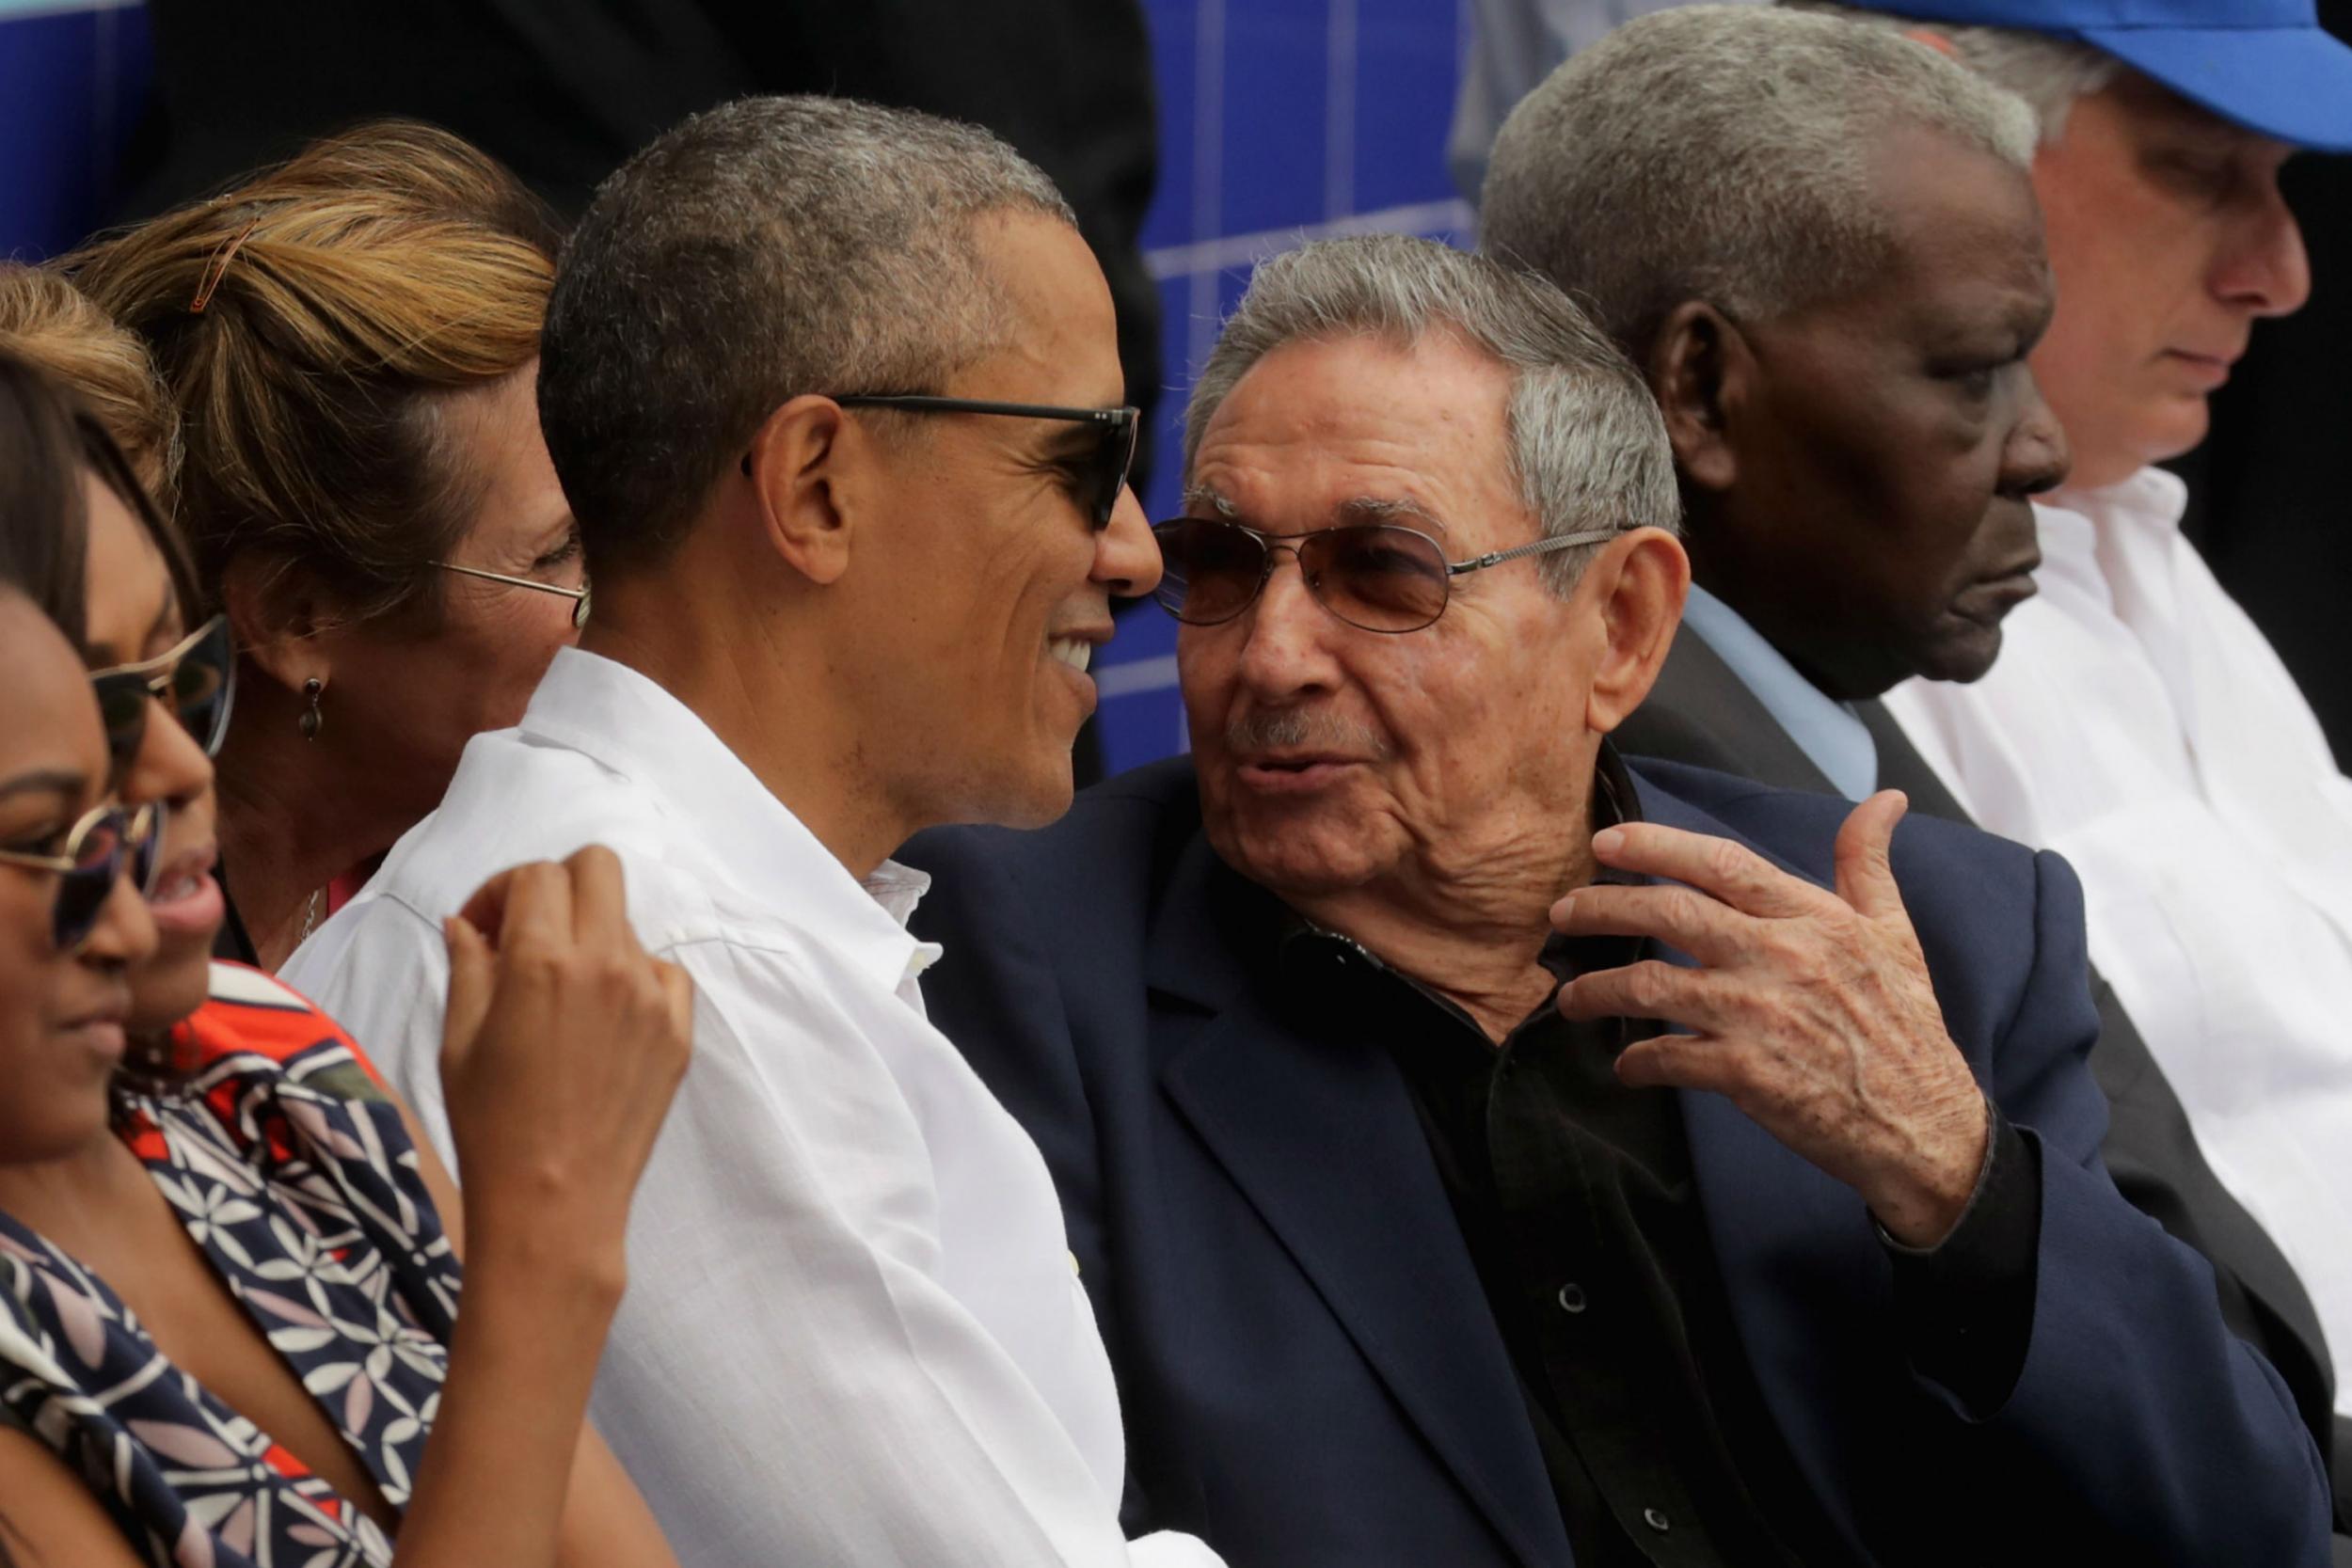 Barack Obama and Cuban President Raul Castro visit during an exposition game between the Cuban national team and the Major League Baseball team Tampa Bay Devil Rays in Havana, Cuba March 2016